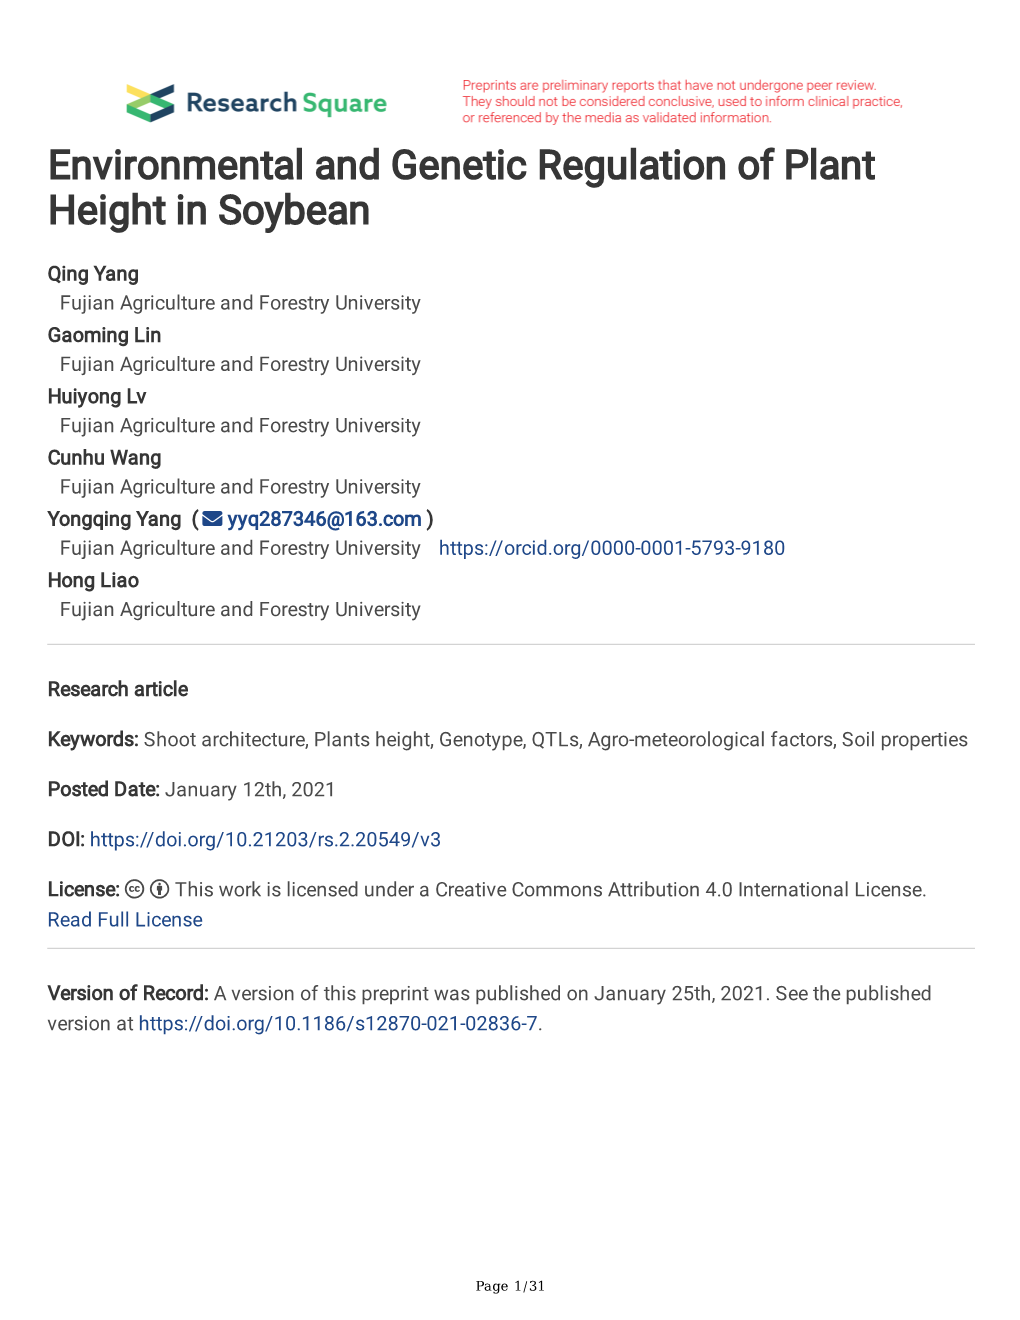 Environmental and Genetic Regulation of Plant Height in Soybean